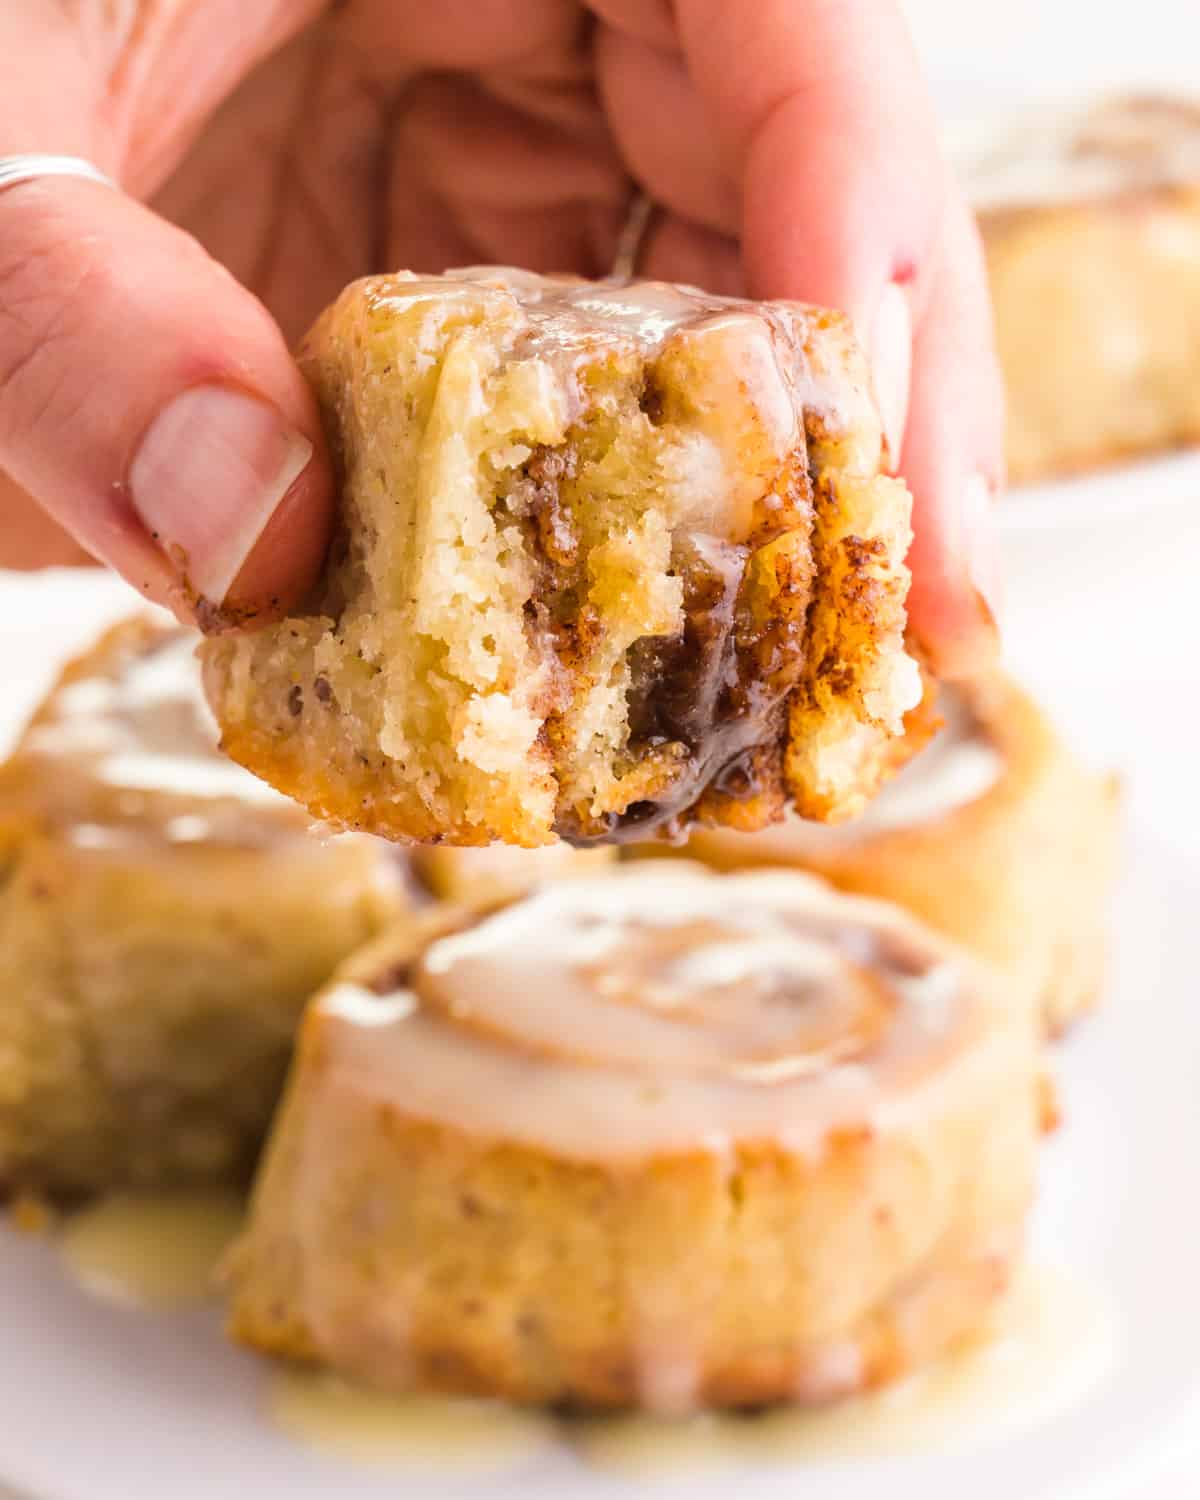 A hand holding a cinnamon roll with a bite, hovering over more cinnamon rolls.